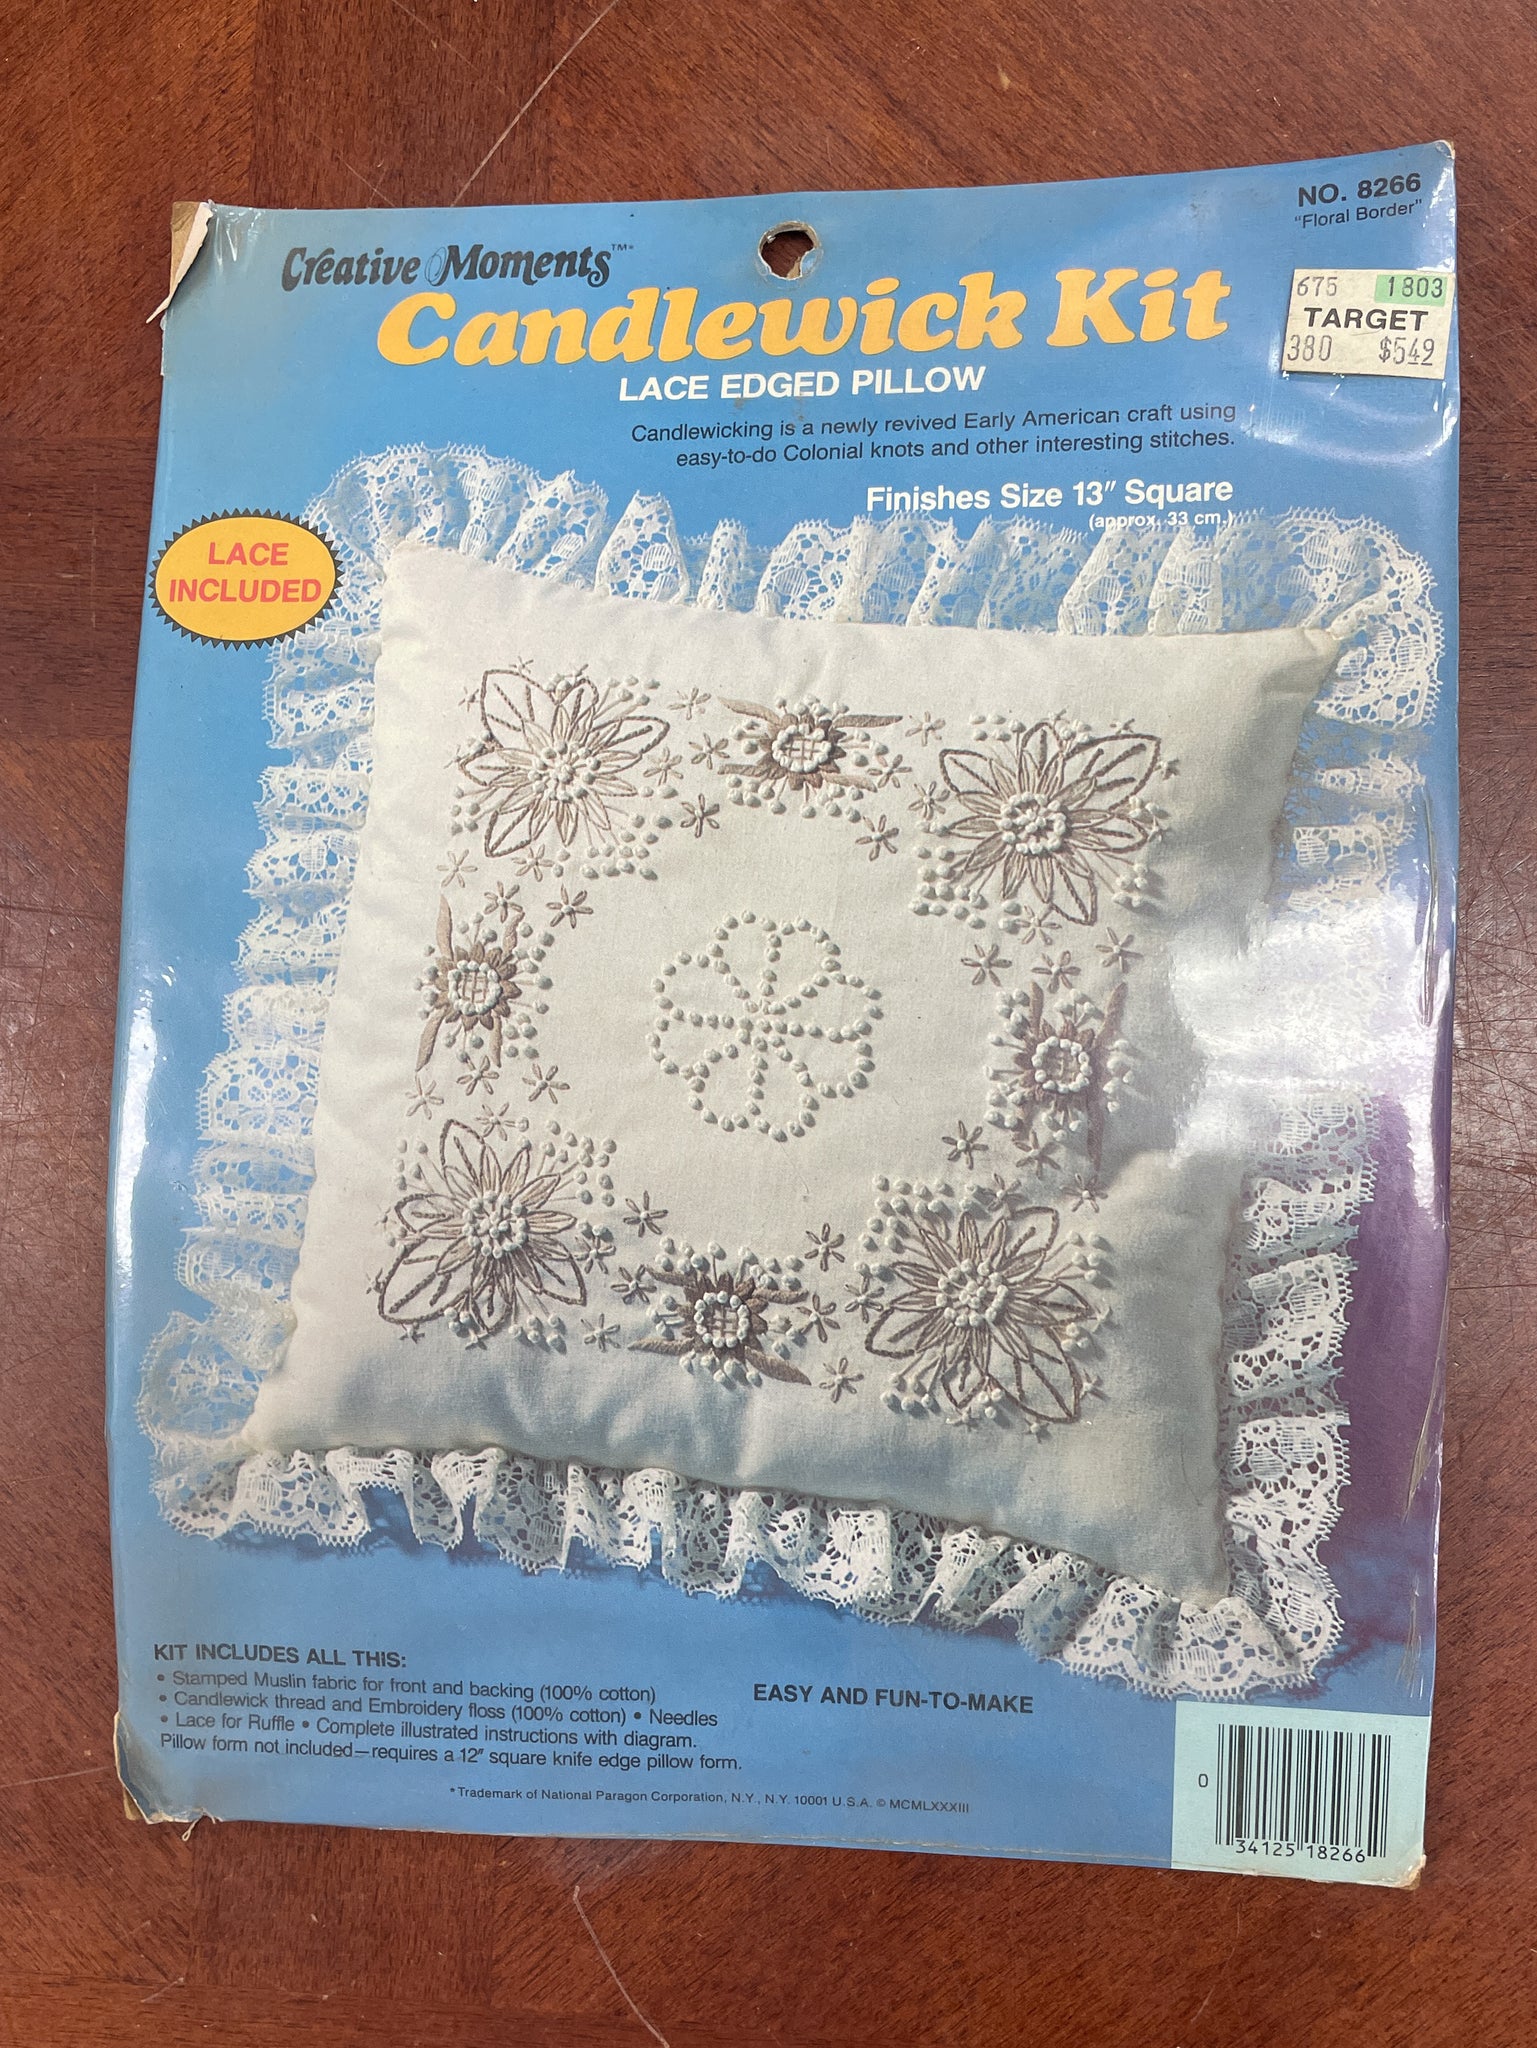 1983 Candlewick Kit - Laced Edged Pillow